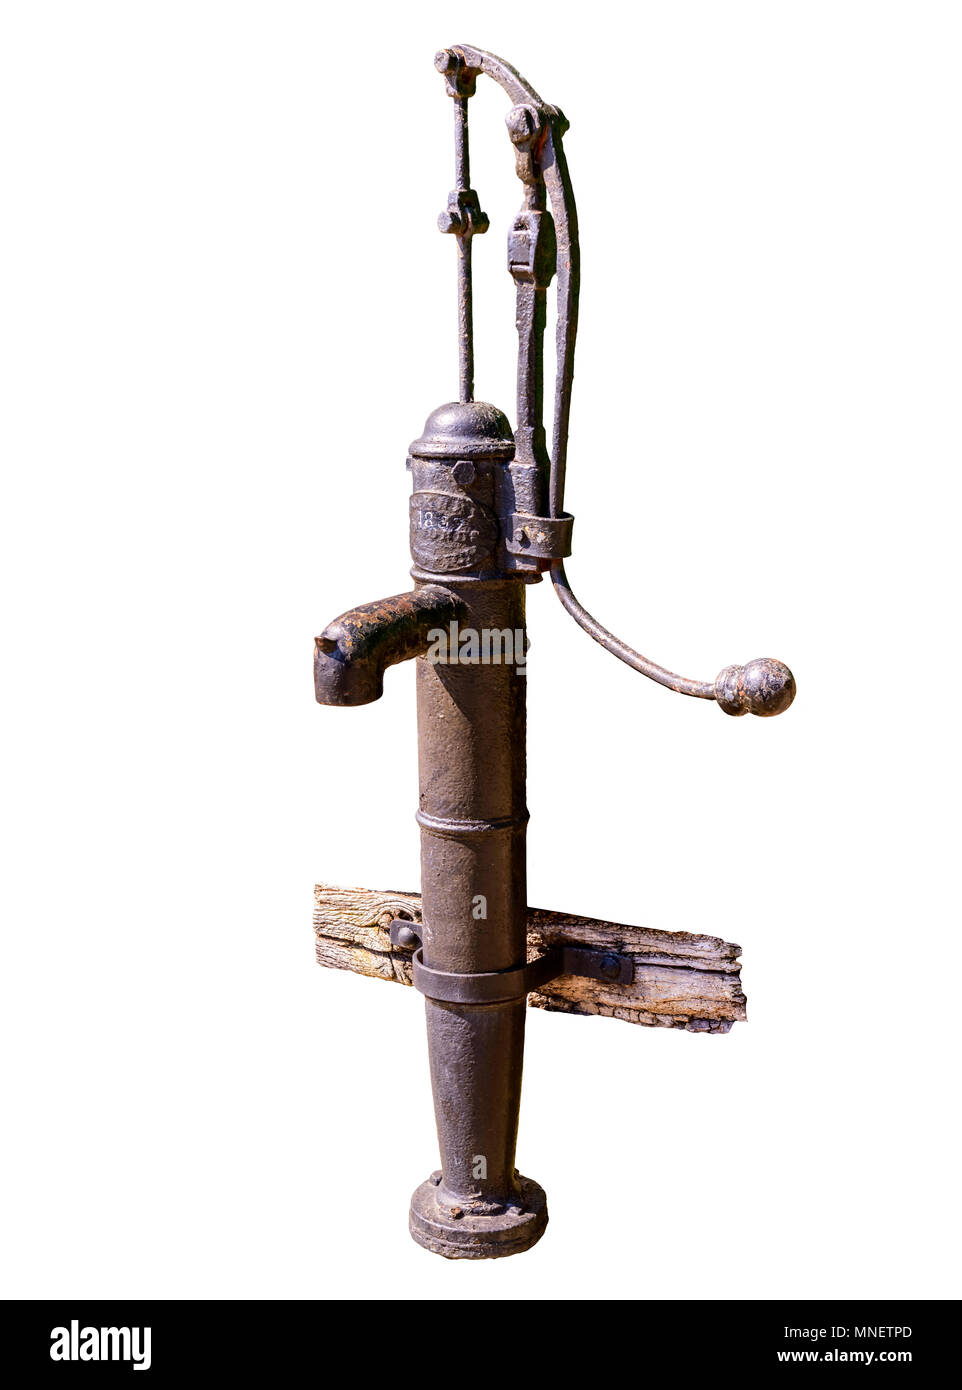 Old rusty water standpipe Stock Photo